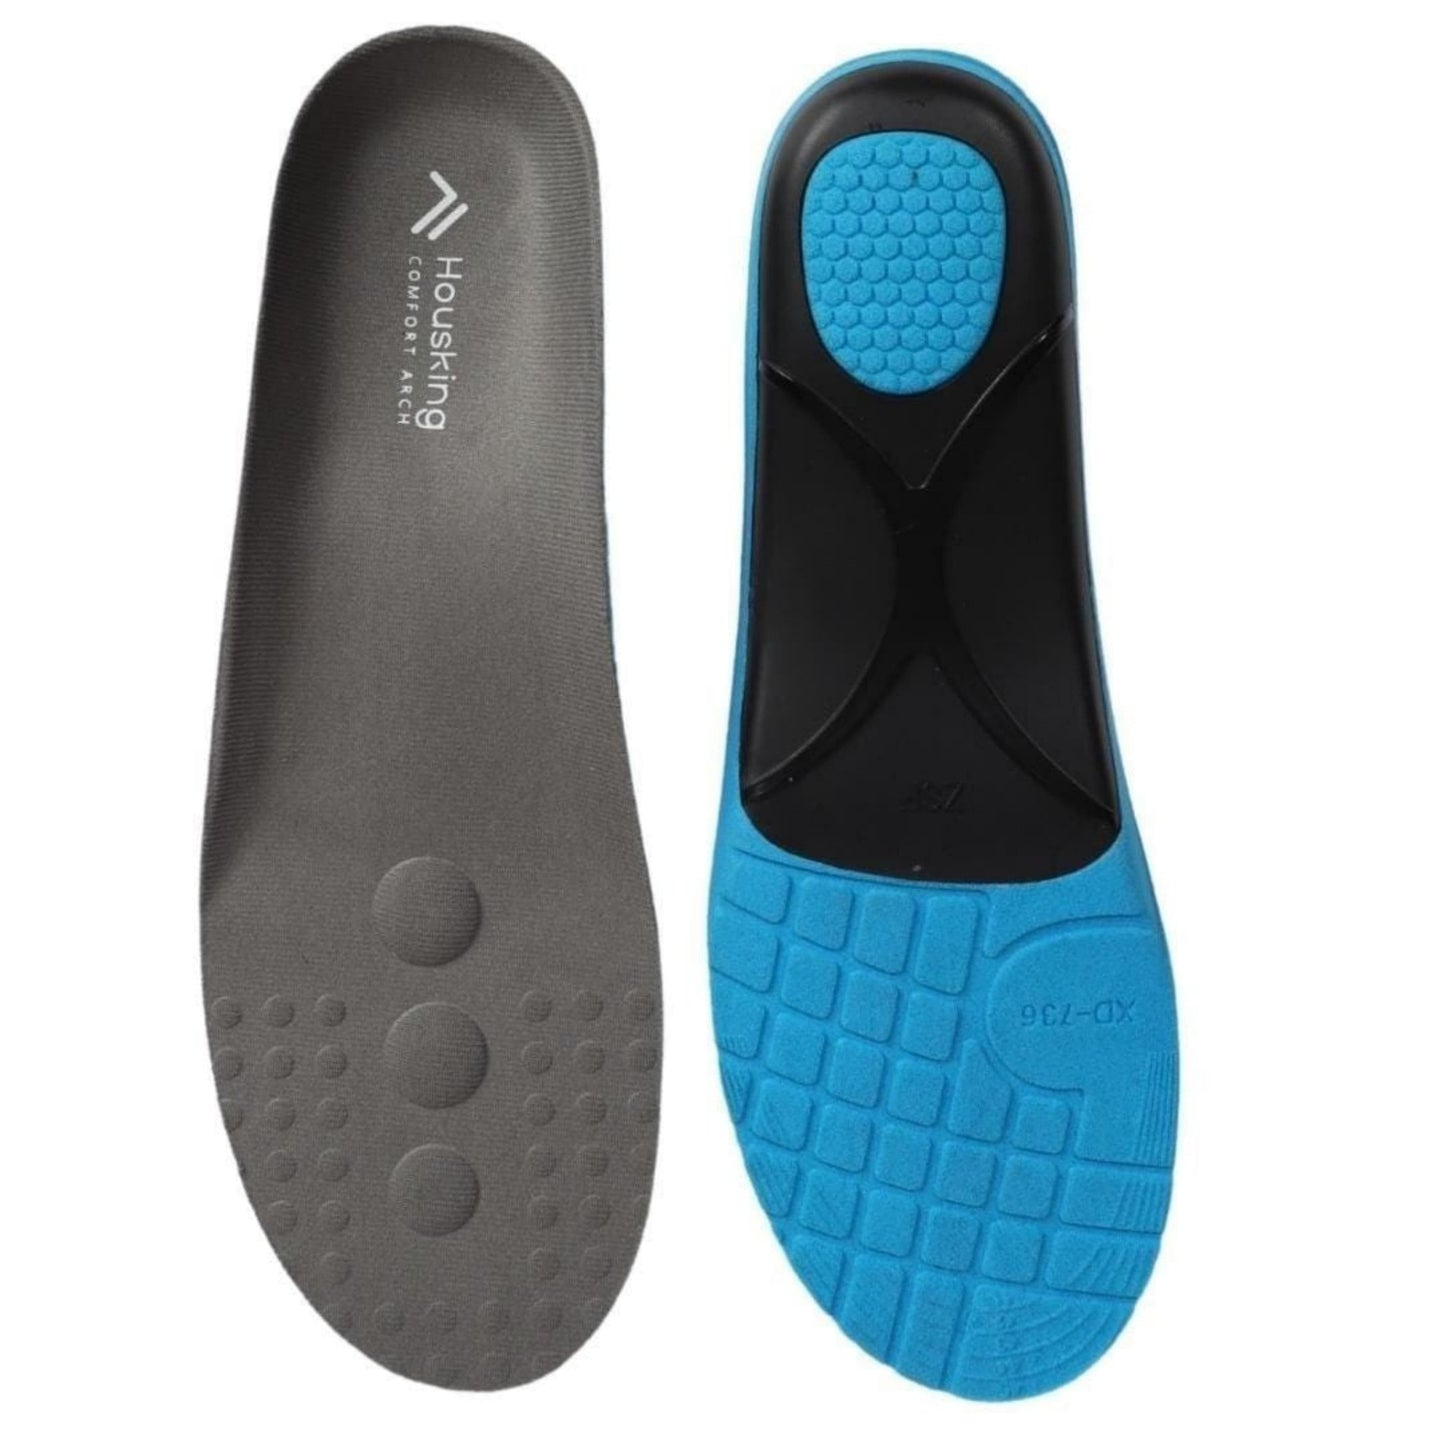 HOUSKING Health Care L HOUSKING  - Medical Orthotic Insoles